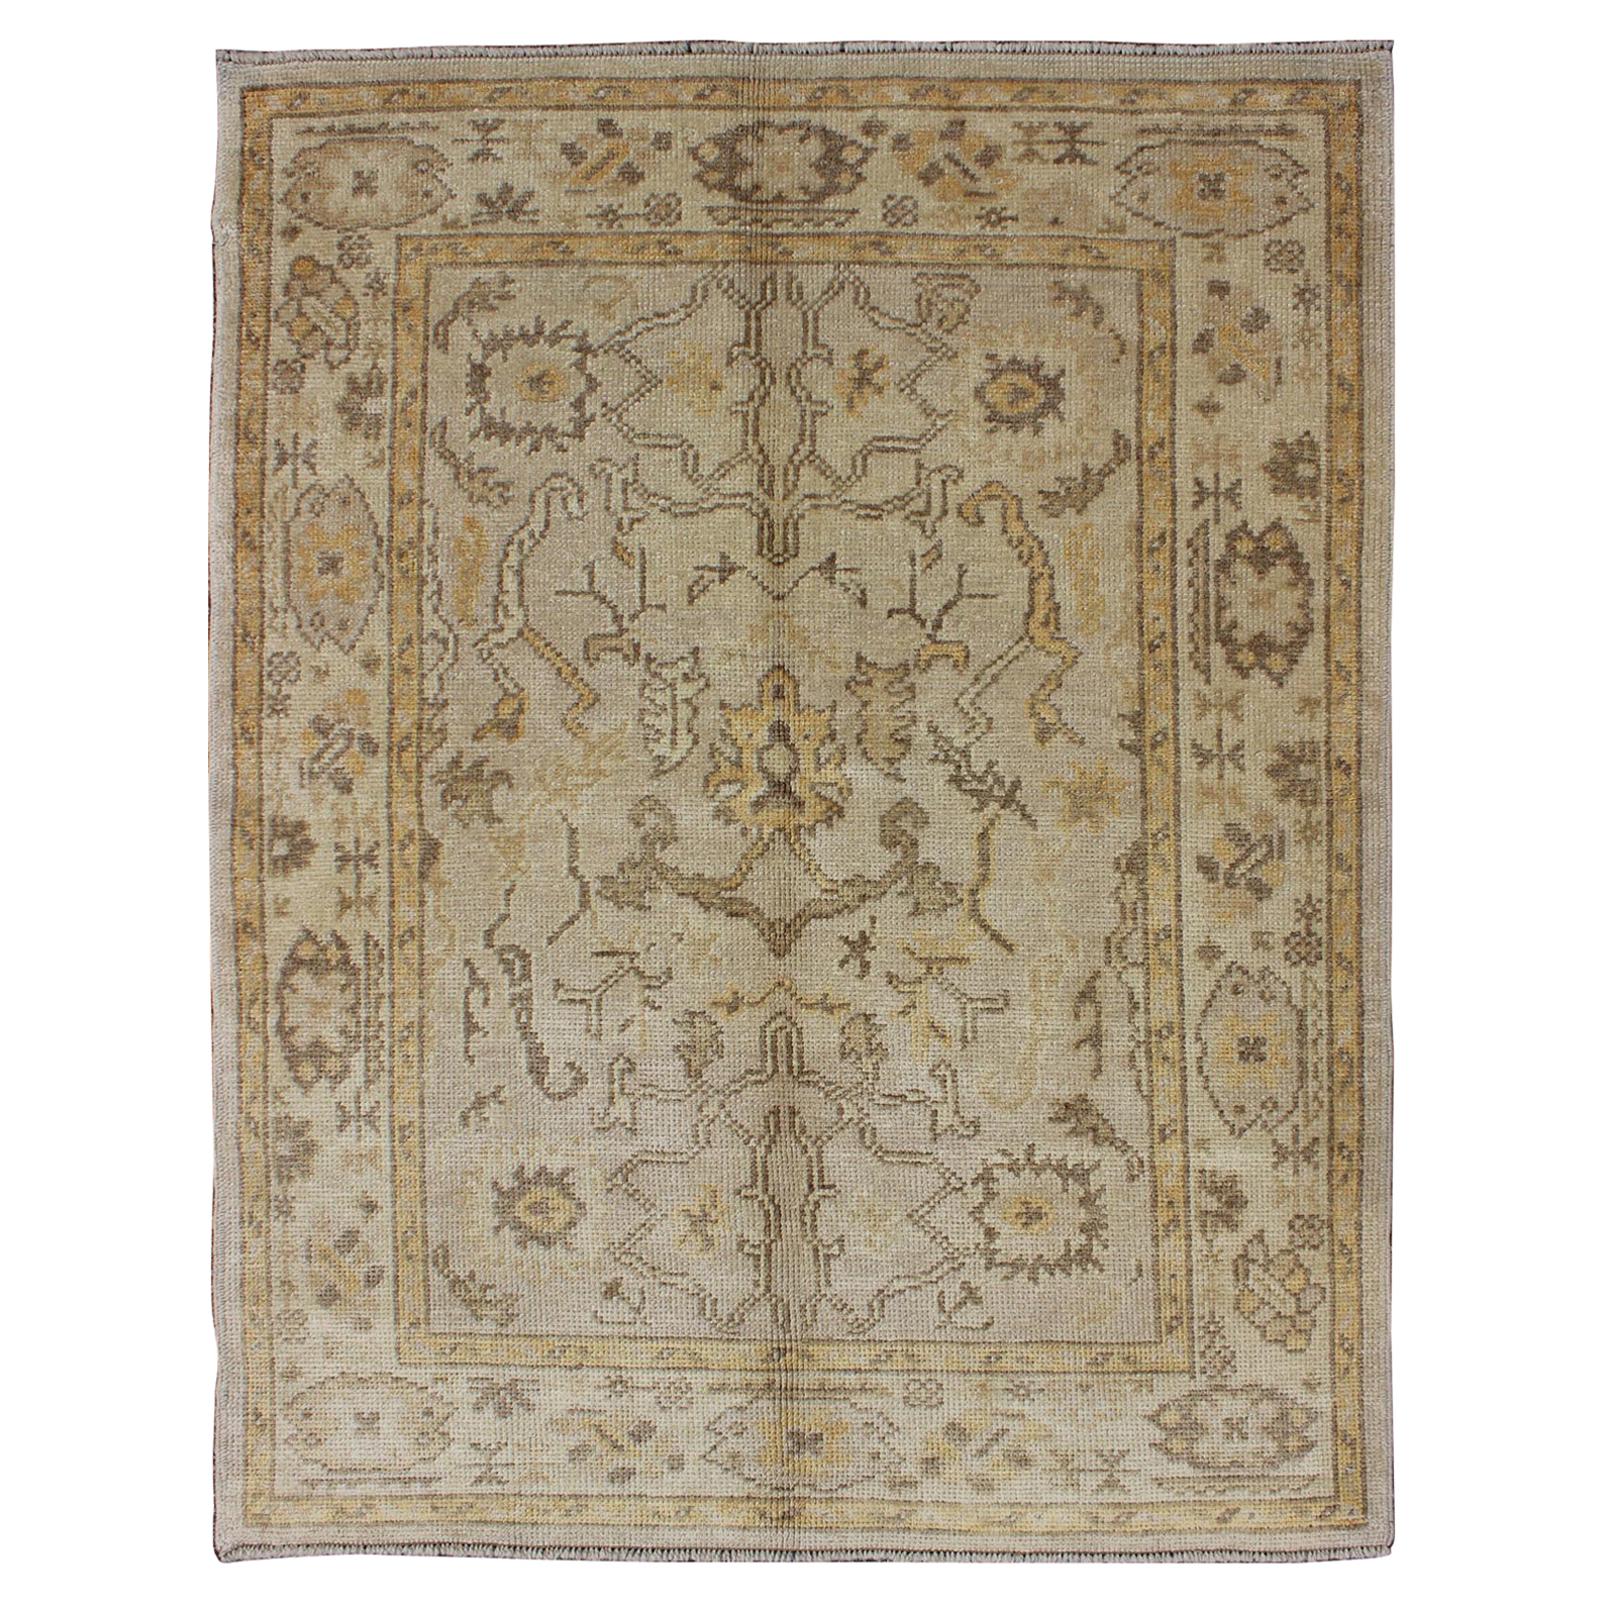 Reproduction Turkish Oushak Rug with Stylized Floral Design in Earth Tone Colors For Sale